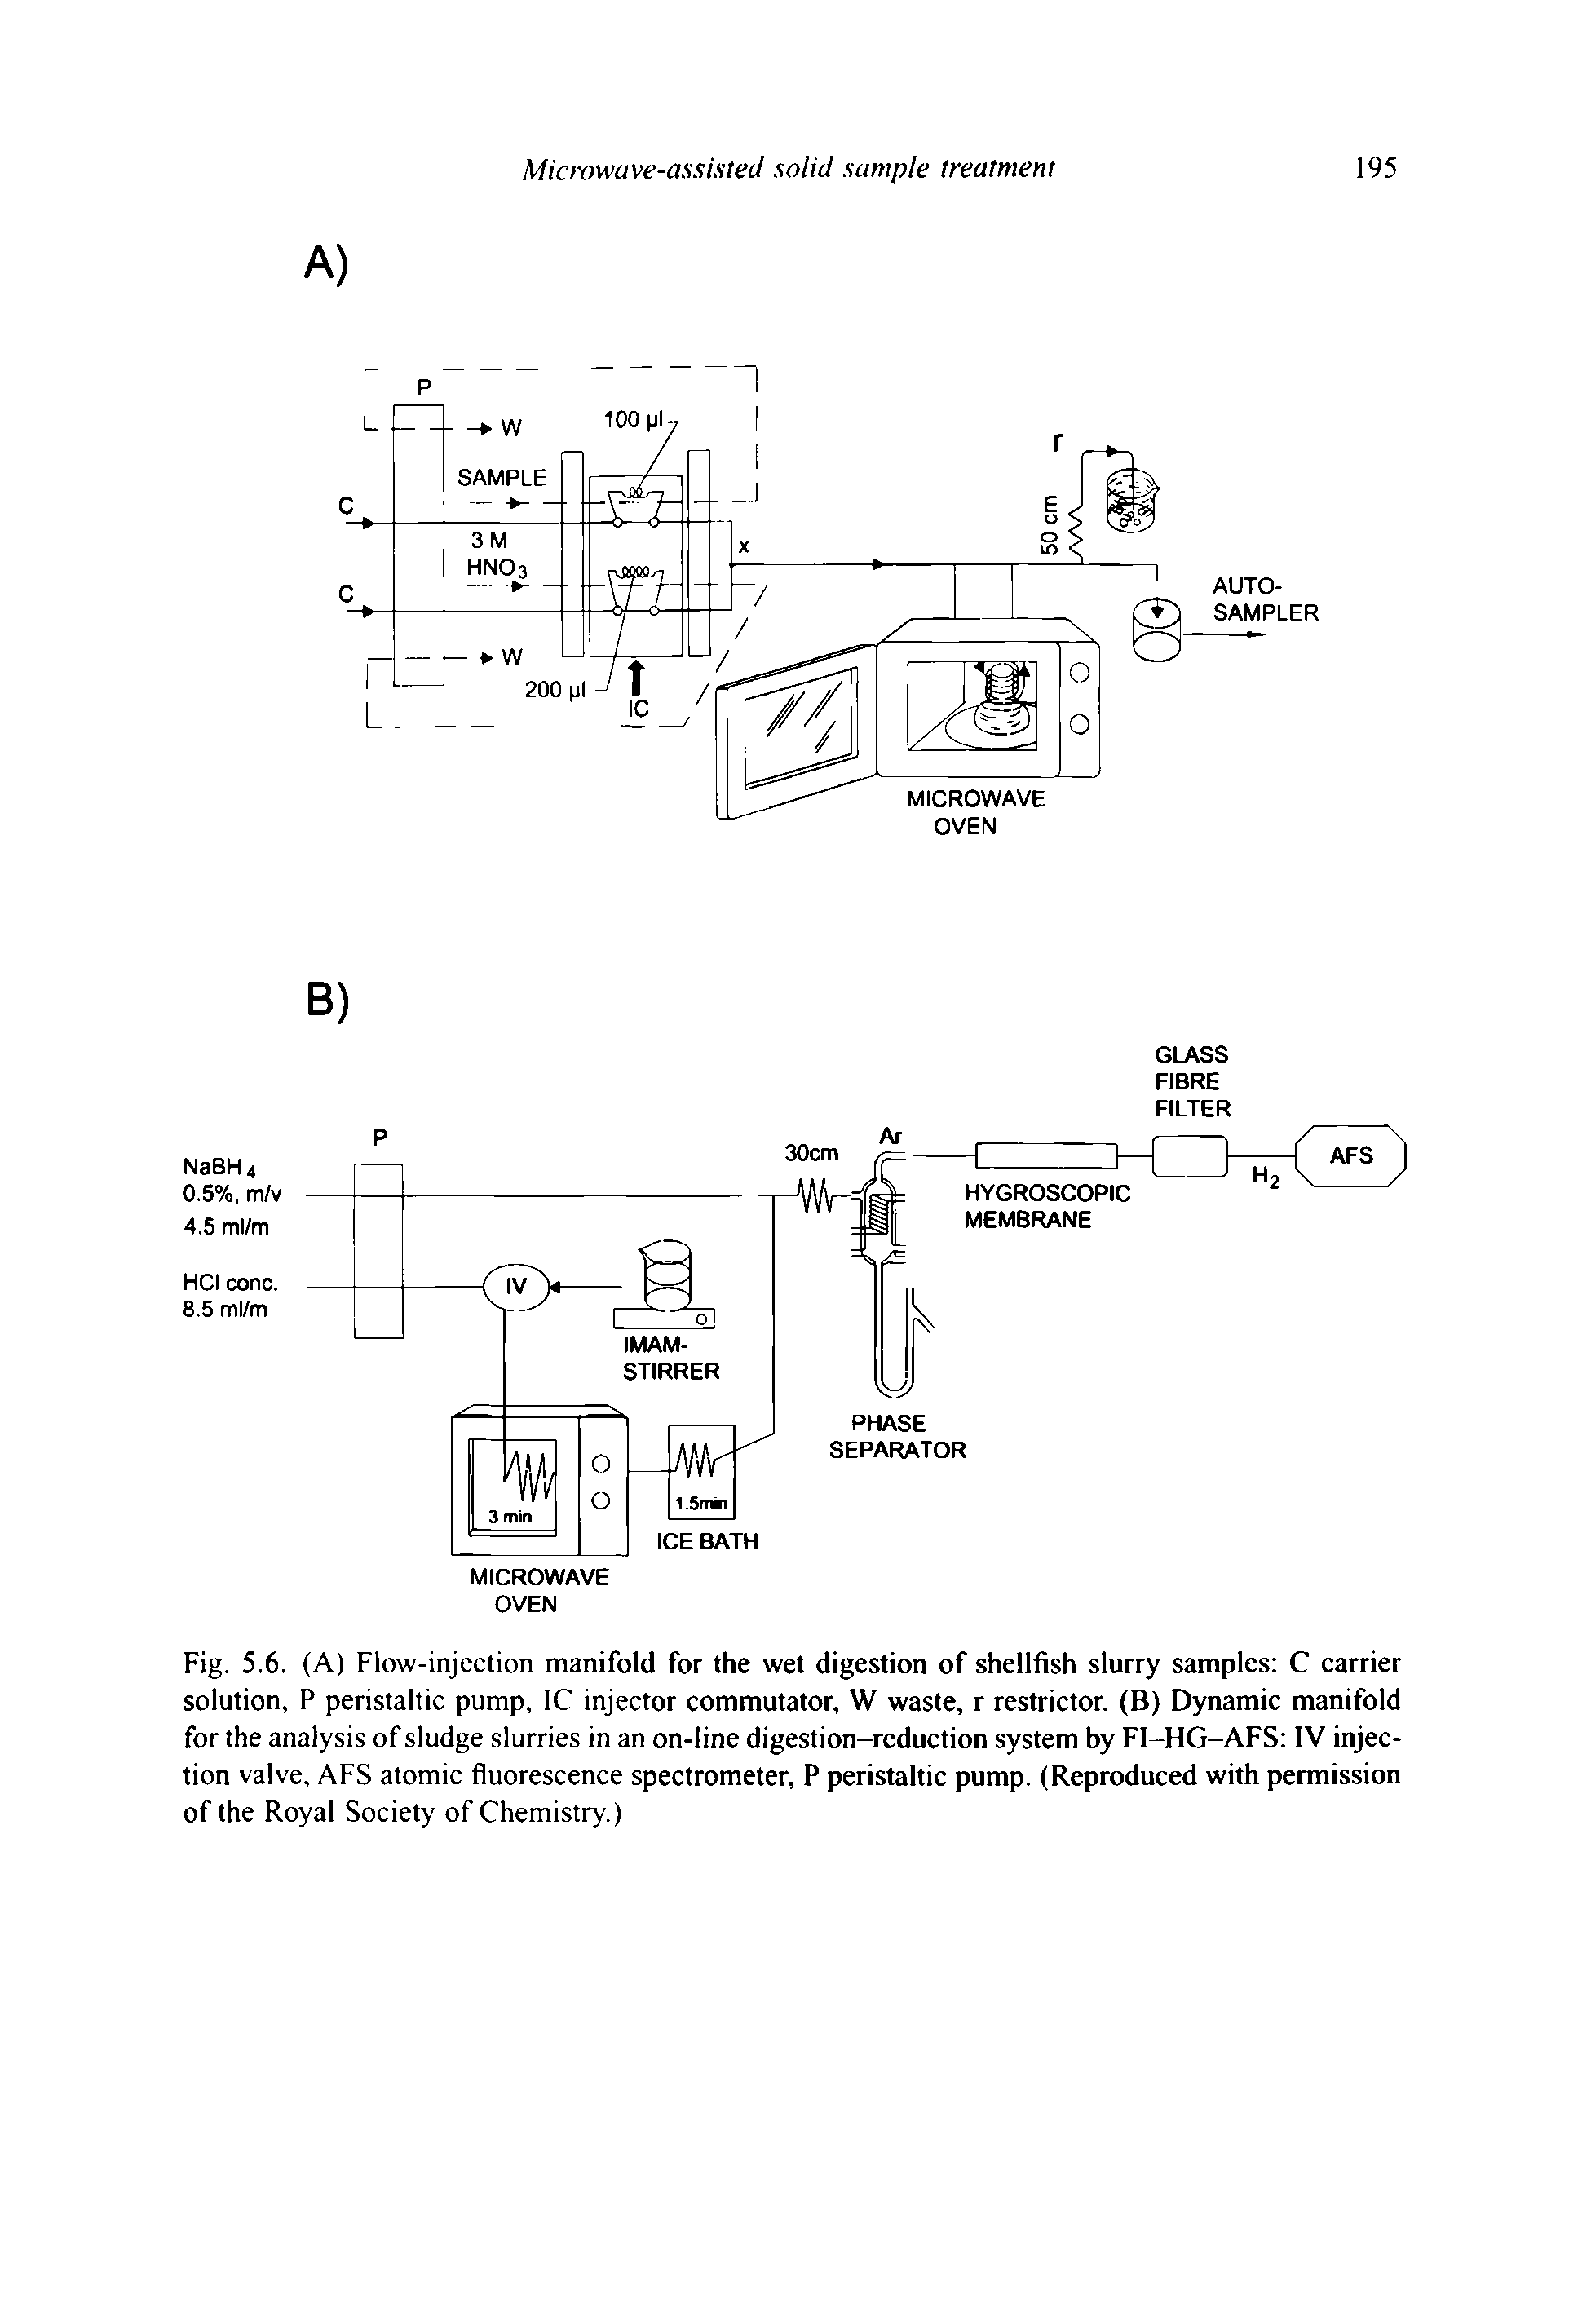 Fig. 5.6. (A) Flow-injection manifold for the wet digestion of shellfish slurry samples C carrier solution, P peristaltic pump, 1C injector commutator, W waste, r restrictor. (B) Dynamic manifold for the analysis of sludge slurries in an on-line digestion-reduction system by Fl-HG-AFS IV injection valve, AFS atomic fluorescence spectrometer, P peristaltic pump. (Reproduced with permission of the Royal Society of Chemistry.)...